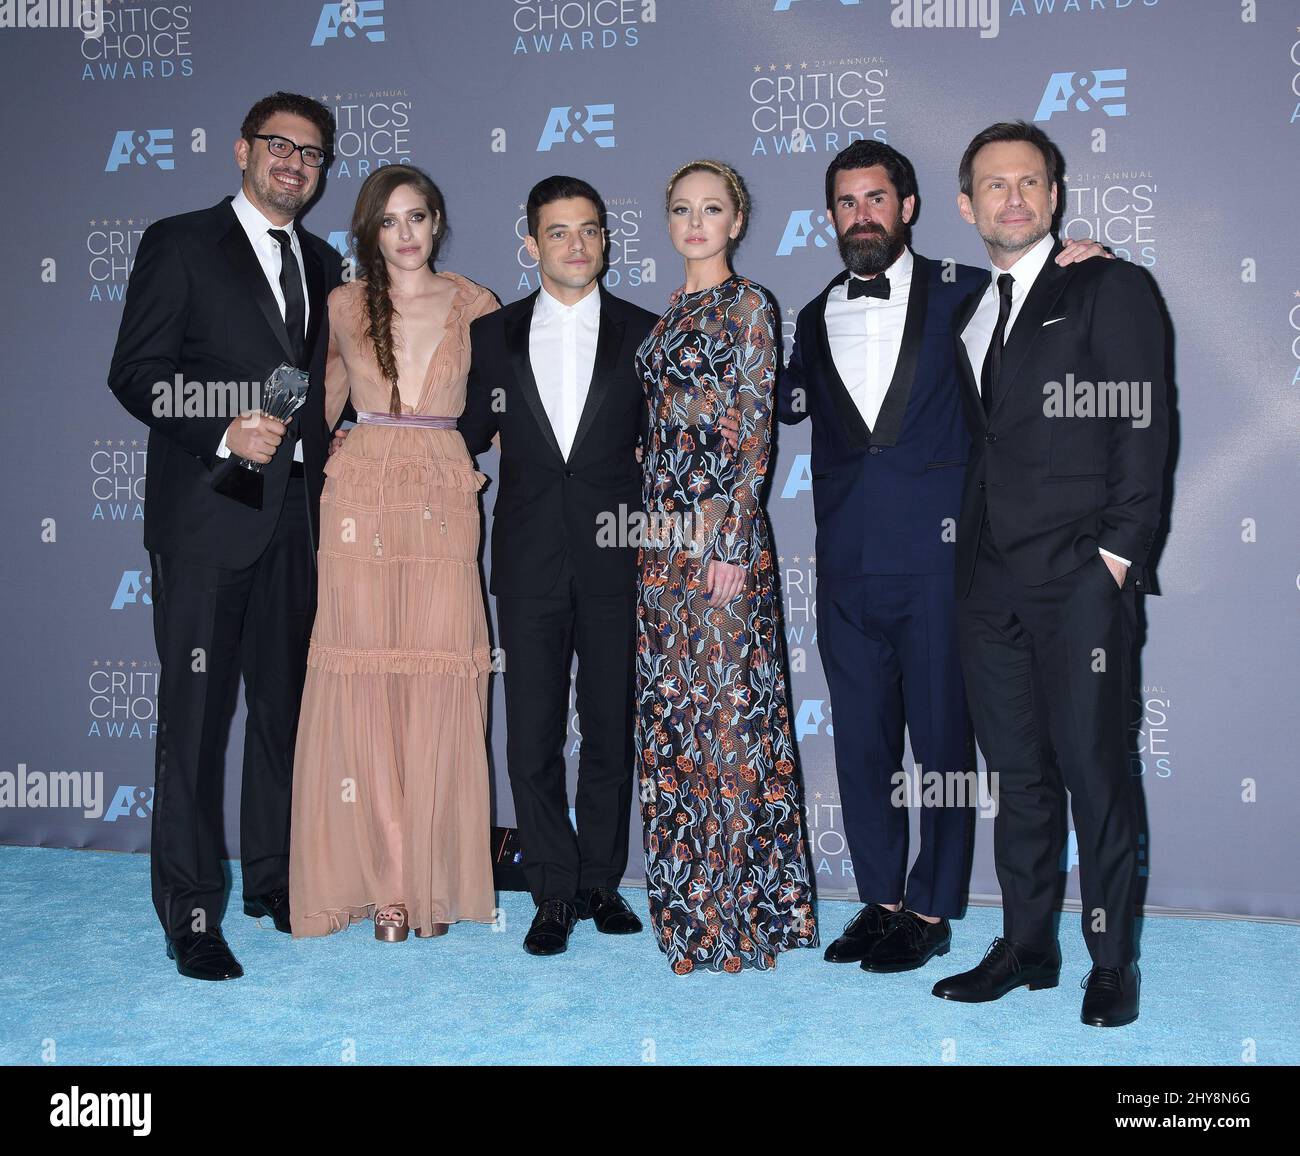 Sam Esmail, Carly Chaikin, Rami Malek, Portia Doubleday, Martin Wallstrom and Christian Slater attending the press room for the 21st Annual Critics' Choice Awards in Los Angeles, California. Stock Photo